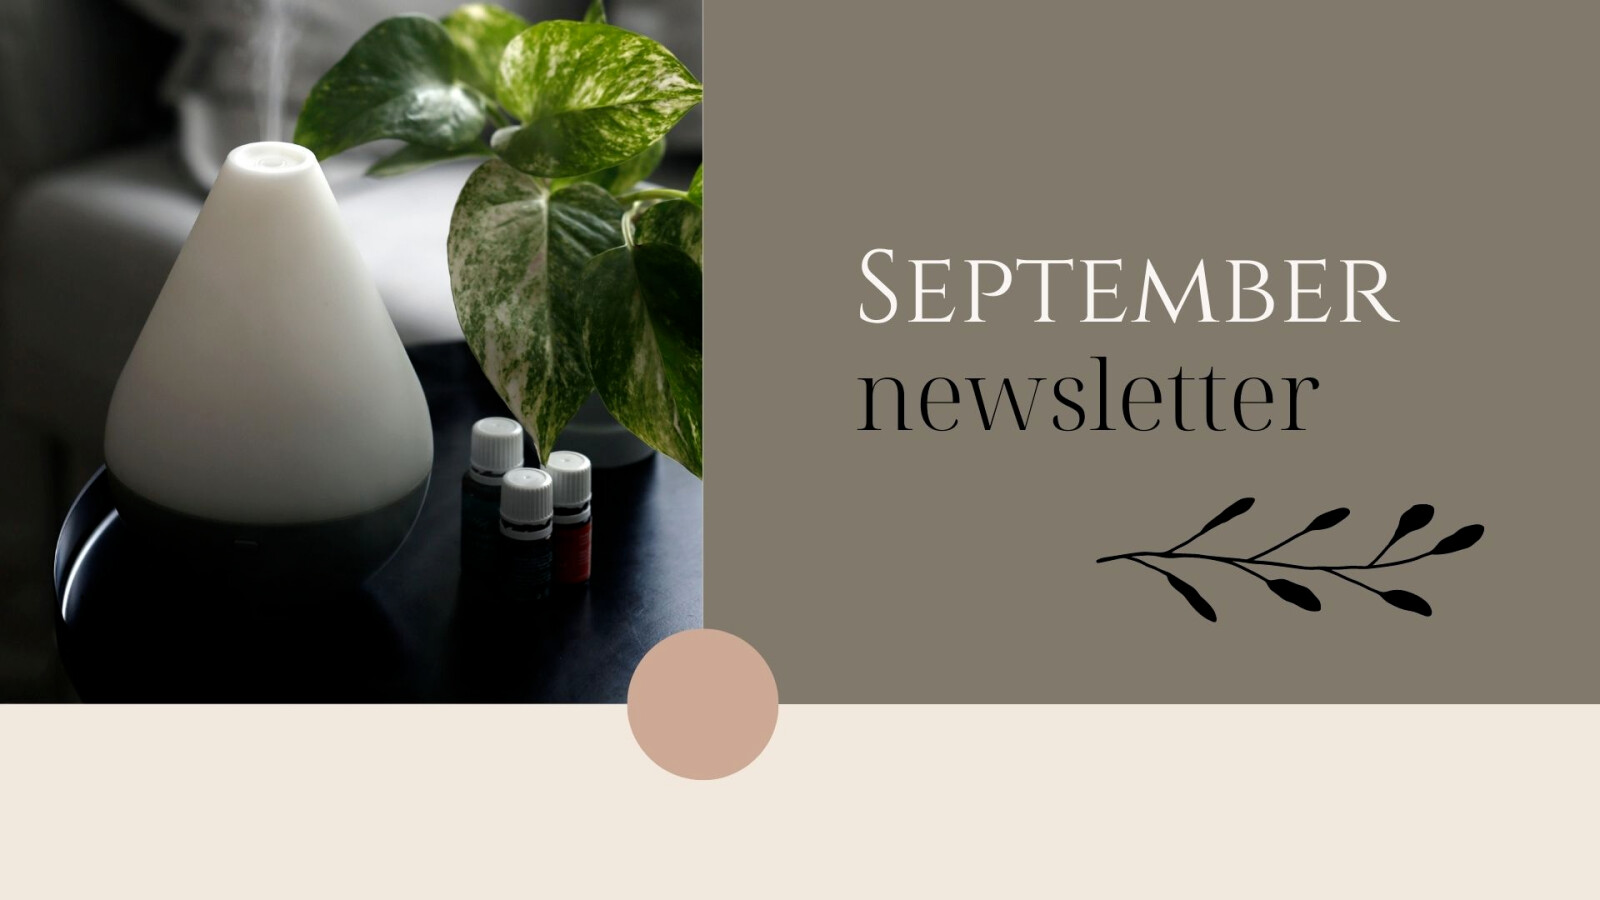 SEPTEMBER NEWSLETTER with RECIPEE'S, TIPS, PROMOS, CLASSES, EVENTS by Aromatic Wholistic Health Spa